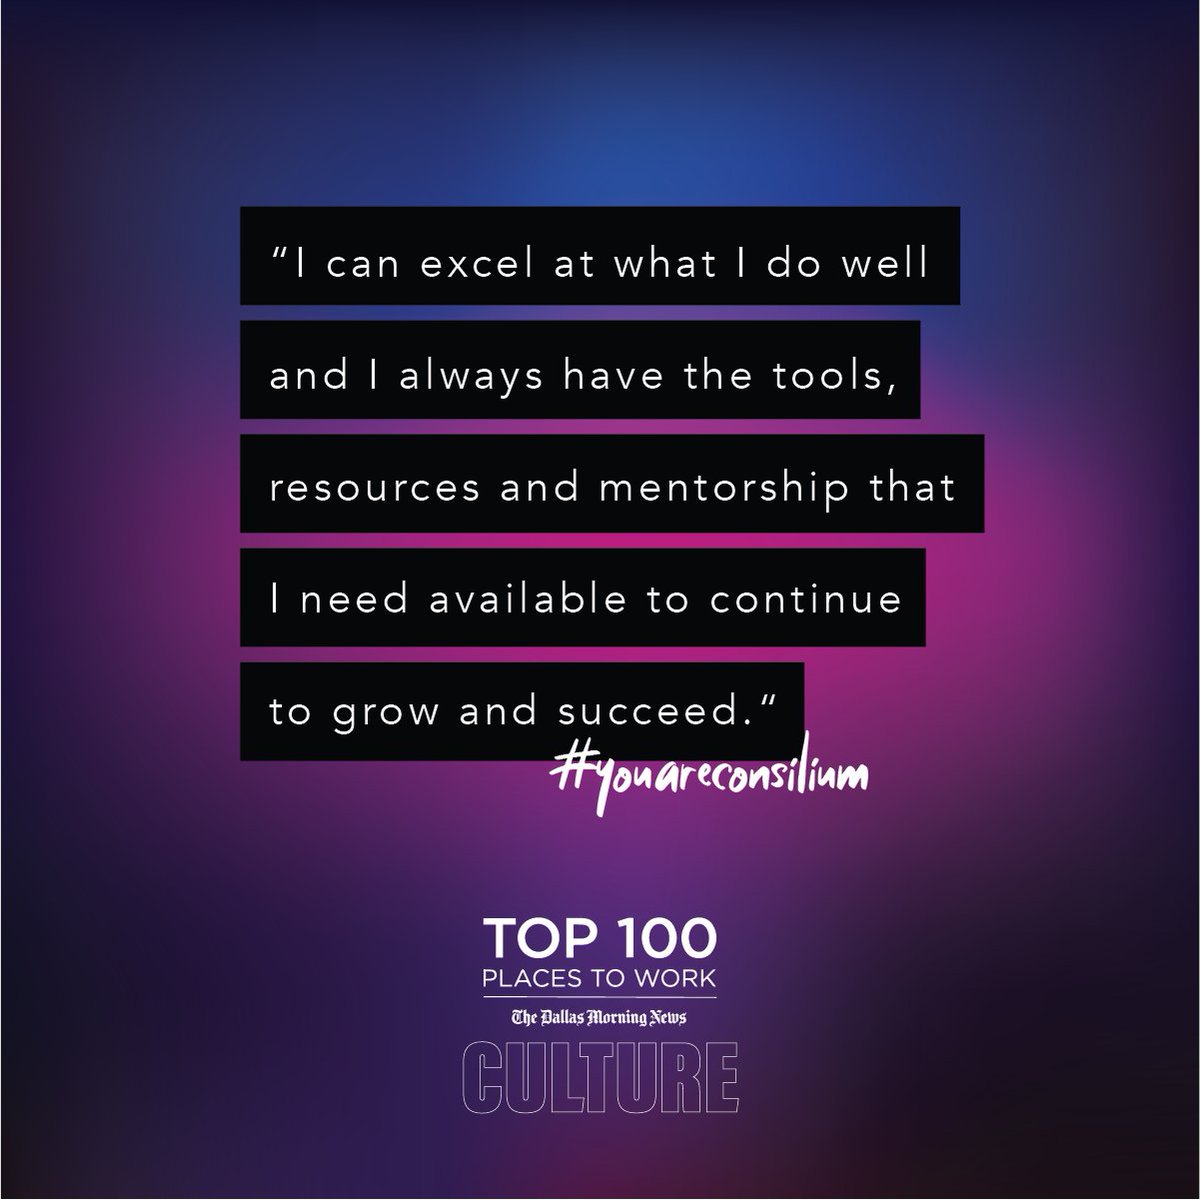 What better way to celebrate than with shout-outs from our team members!  #top100placestowork

A new career awaits you in 2023!  Join our Team!
Visit: bit.ly/3GAN6EO

#jobinterview #careerdevelopment #employeeappreciation #youareconsilium #bestinstaffing